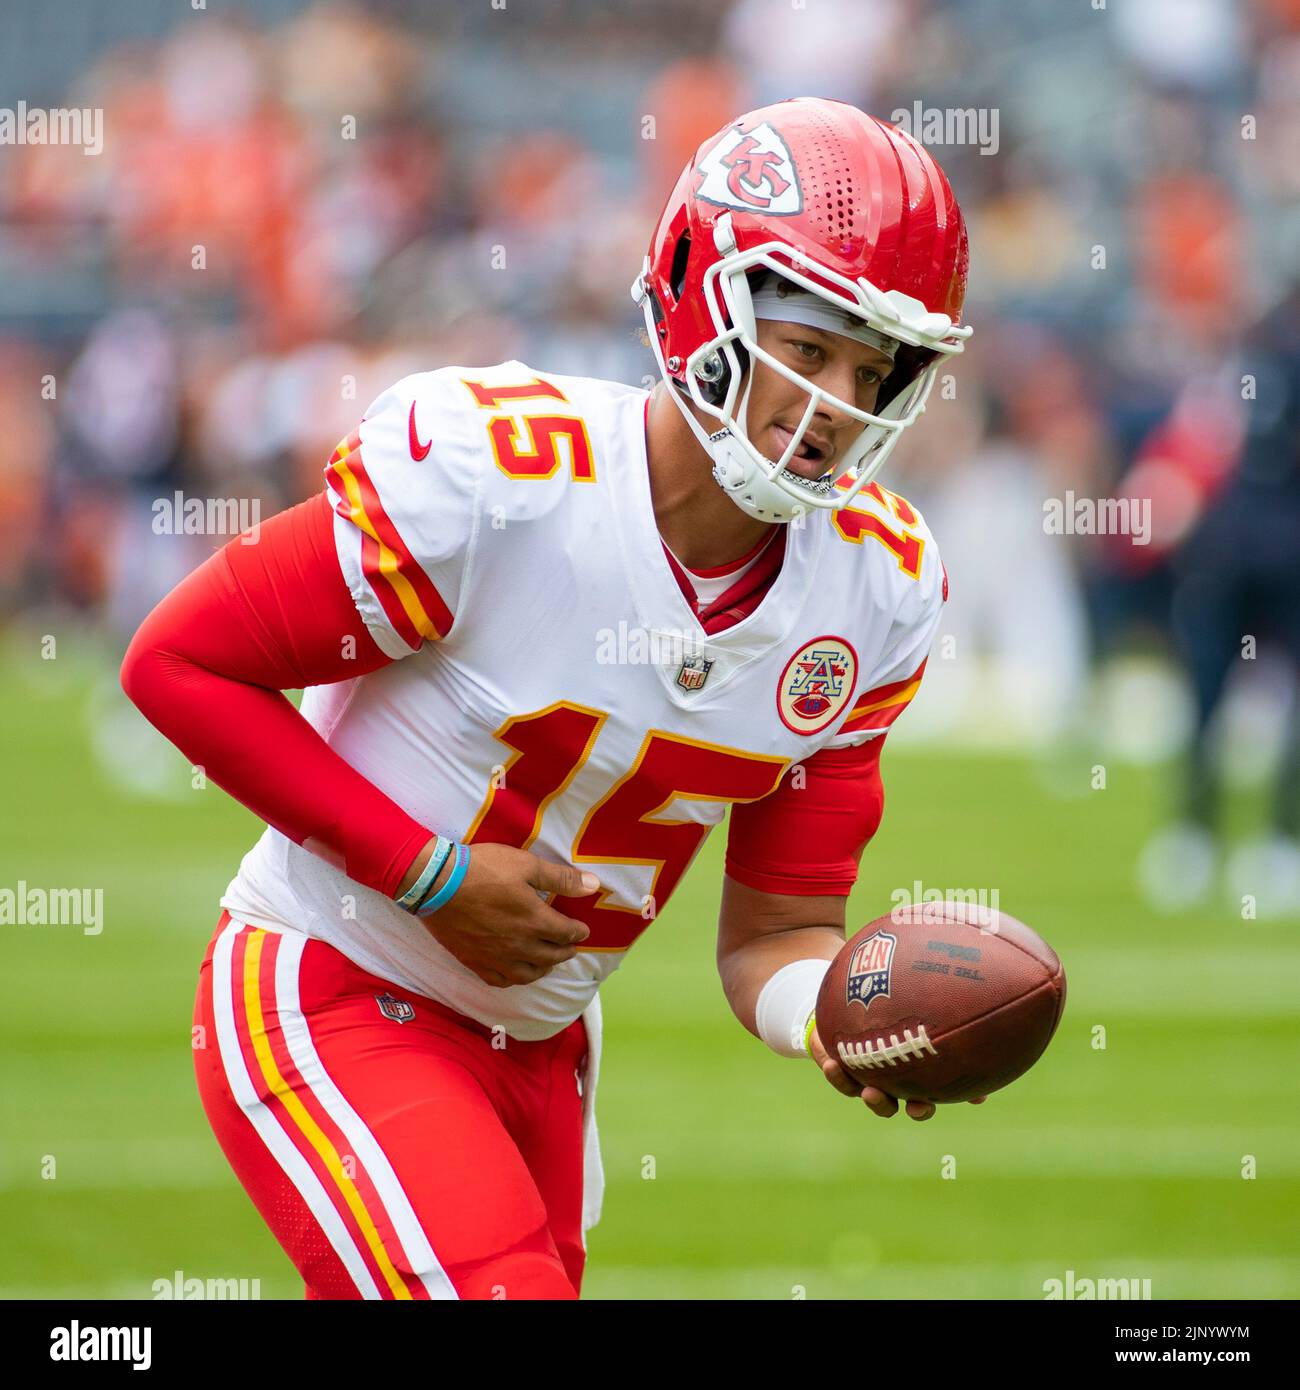 August 13, 2022: Chicago, Illinois, U.S. - Kansas City Chiefs Quarterback #15 Patrick Mahomes warms up before the game between the Kansas City Chiefs and the Chicago Bears at Soldier Field in Chicago, IL. Stock Photo